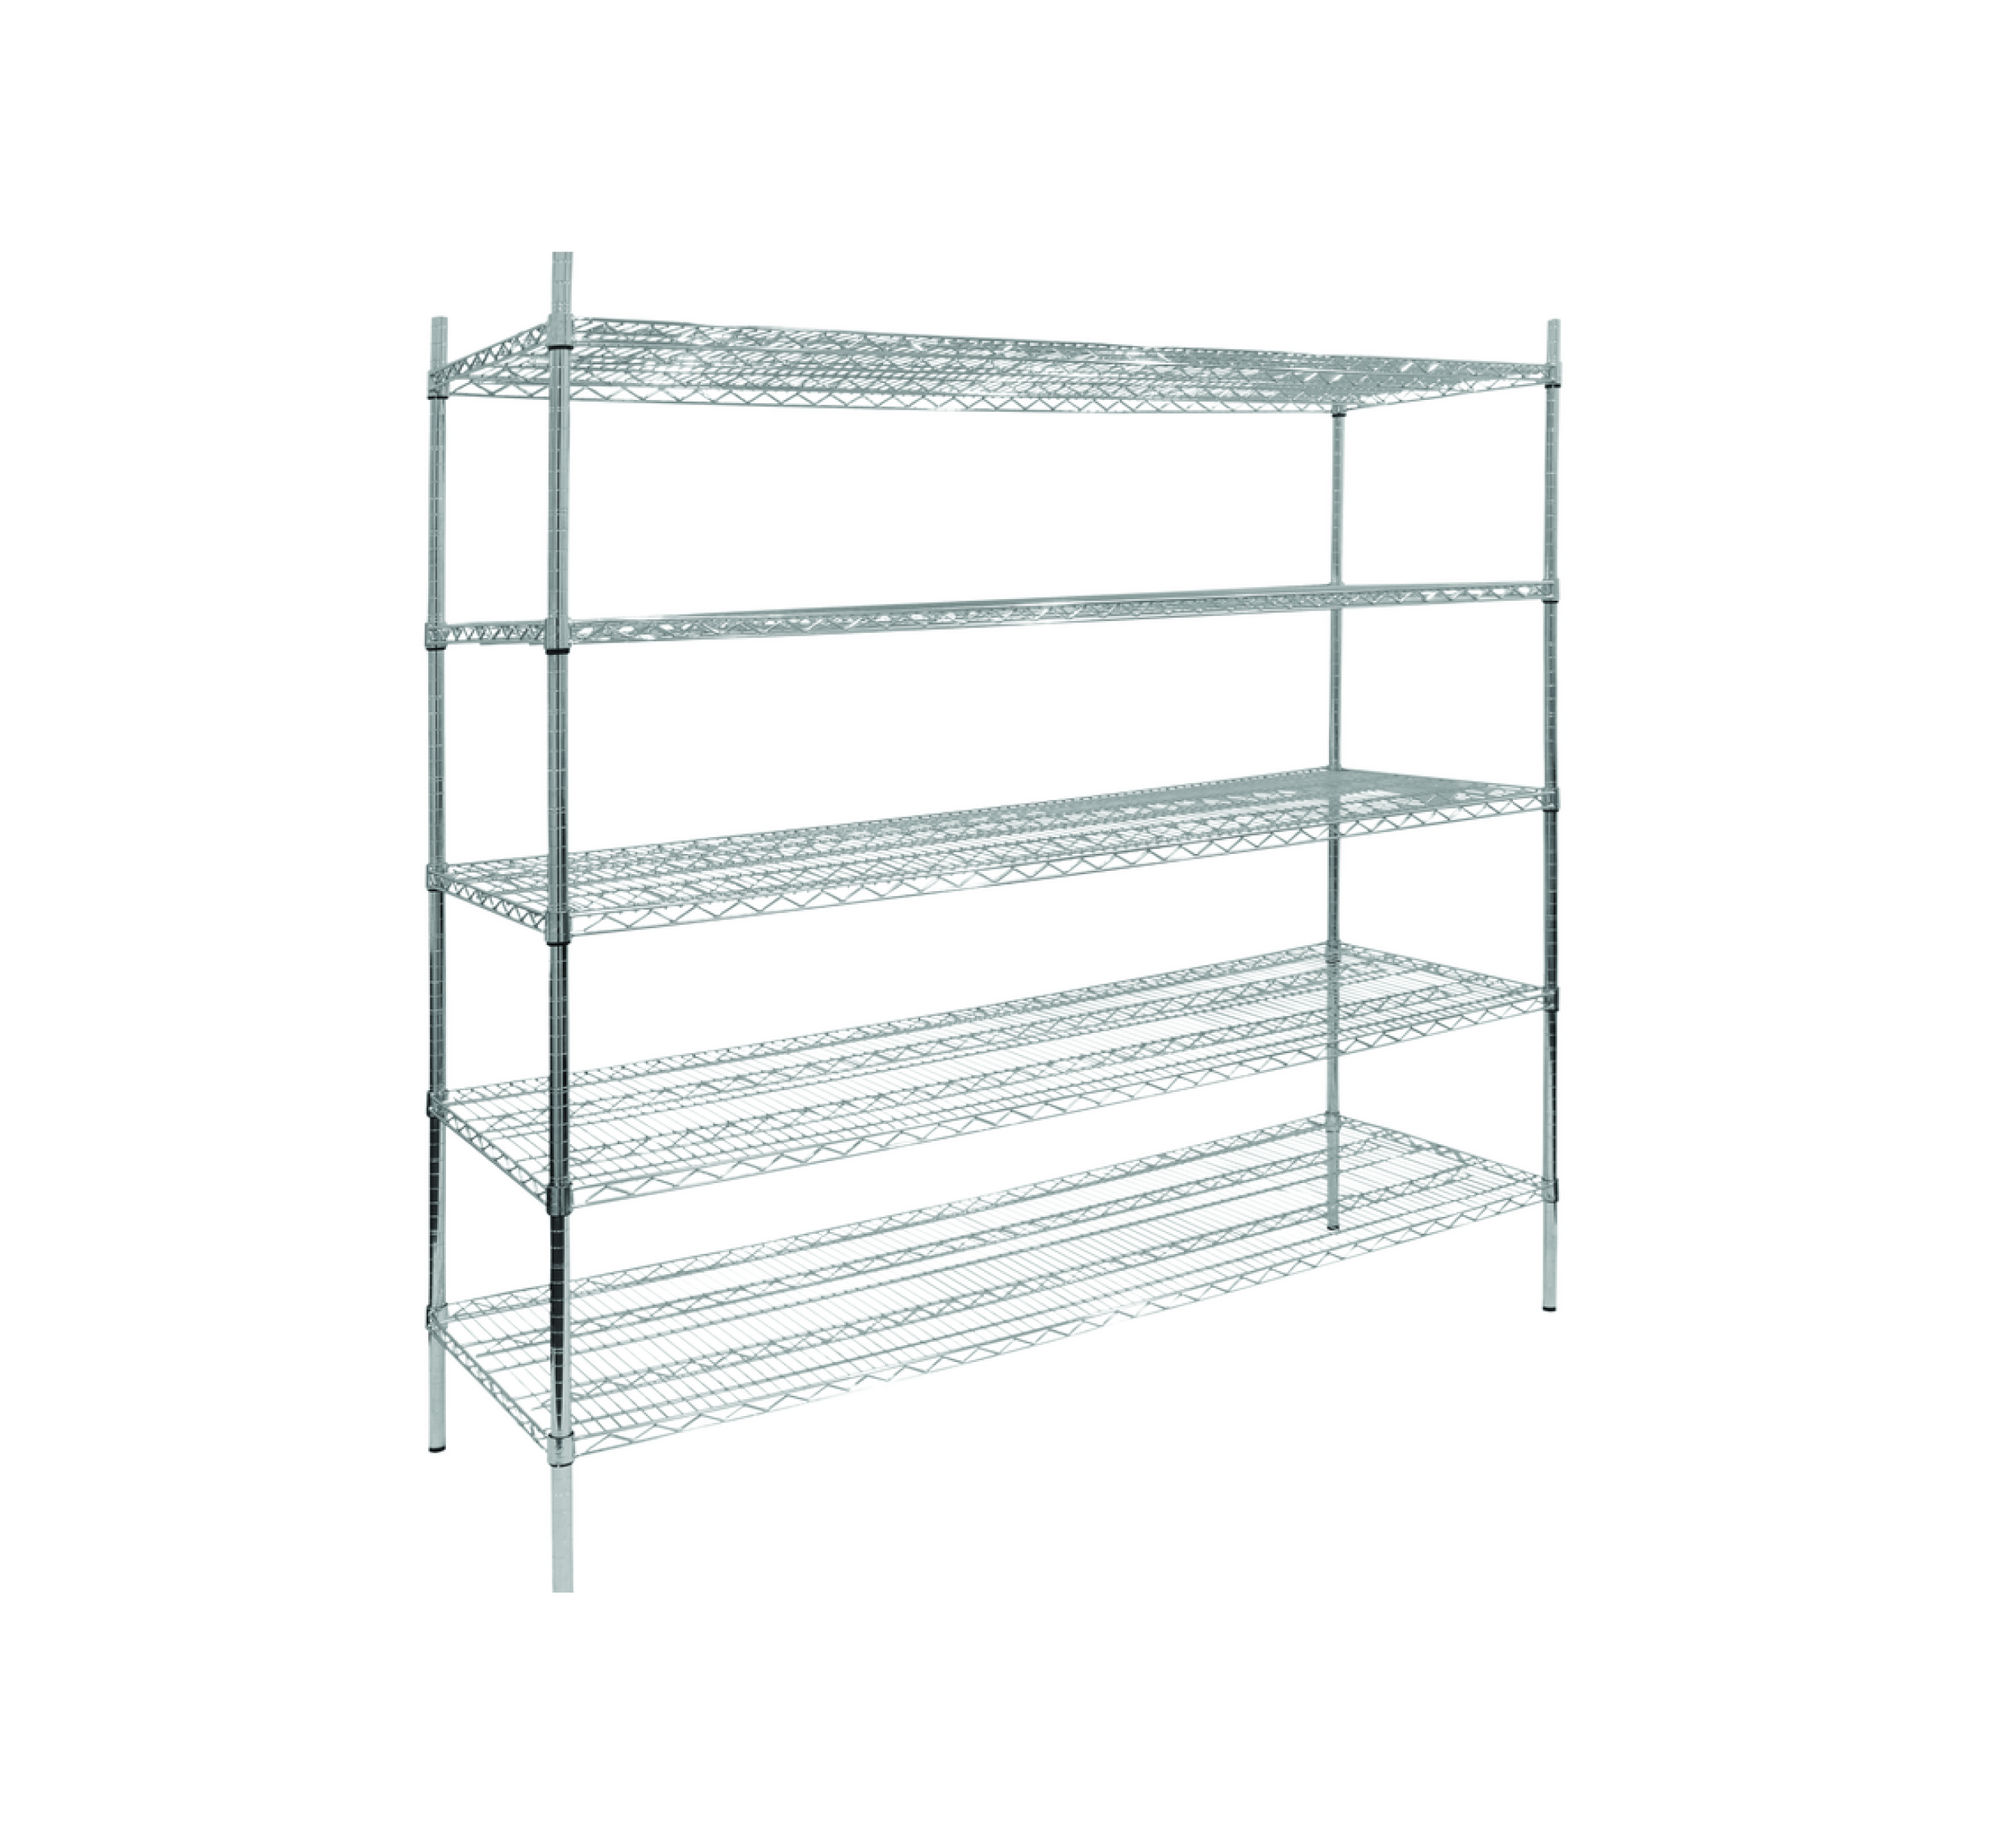 Wired shelves for storage